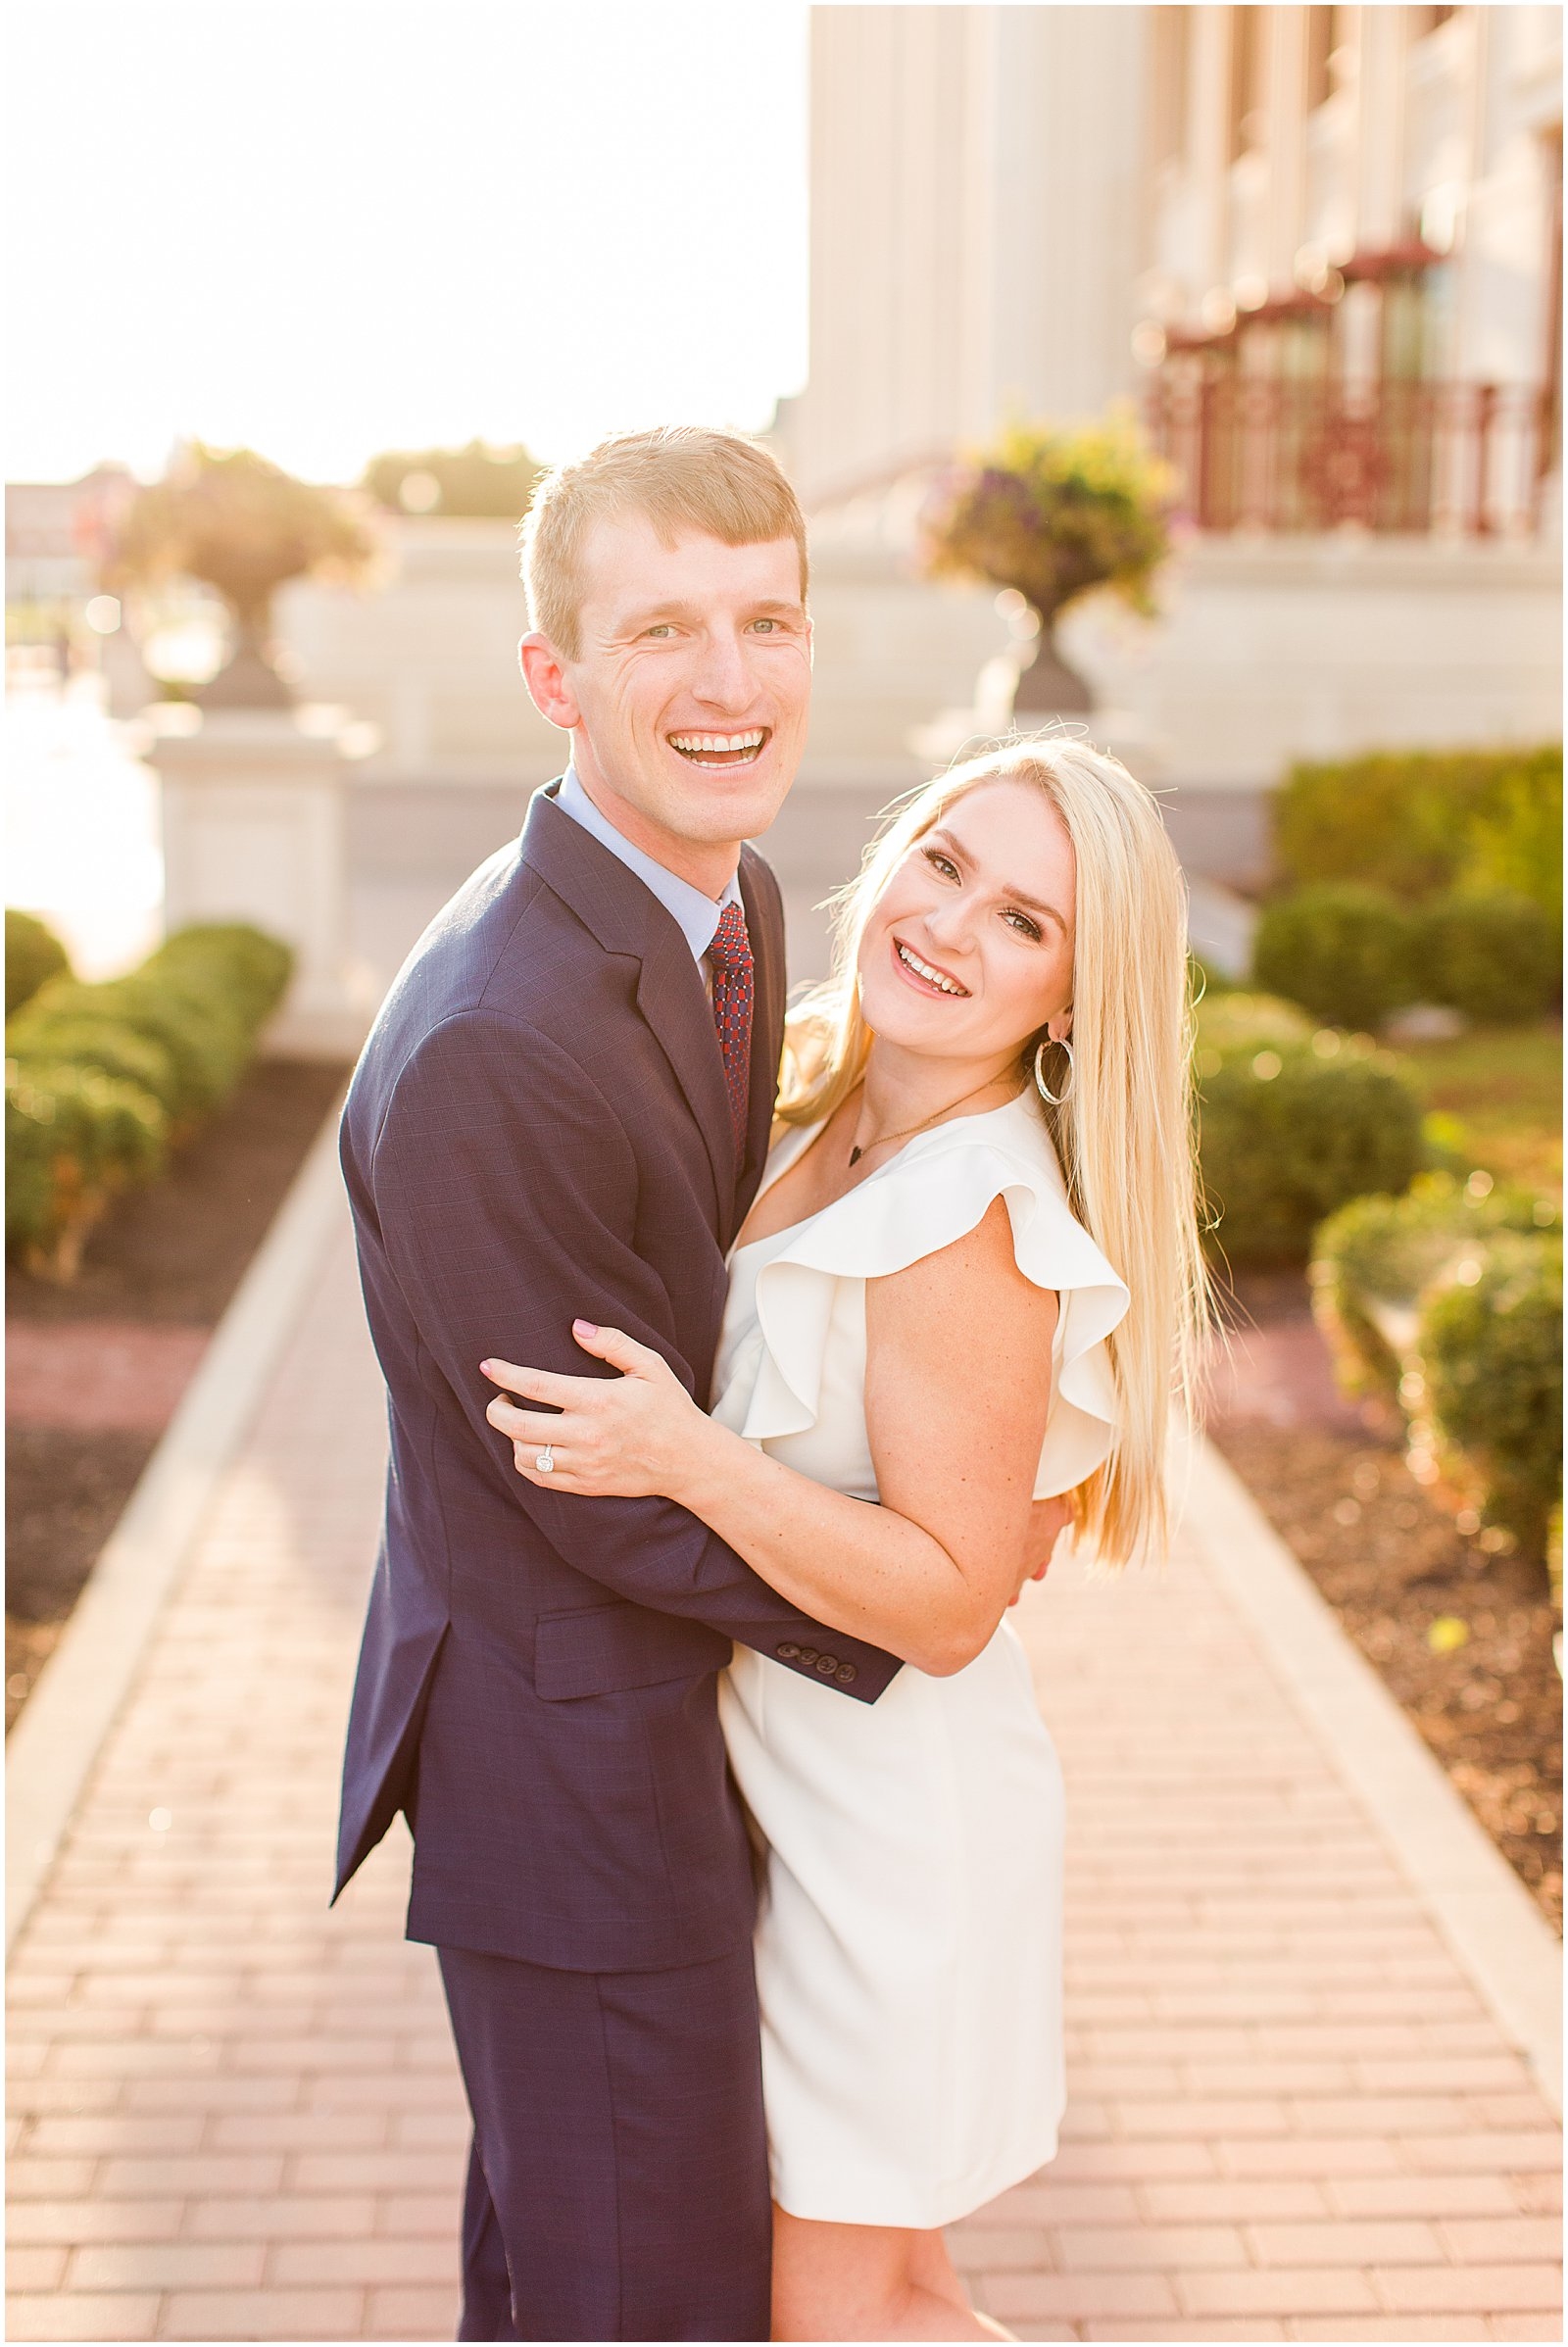 A Cute and Cuddly Engagement Session in Carmel, IN | Abbi and Josh0014.jpg